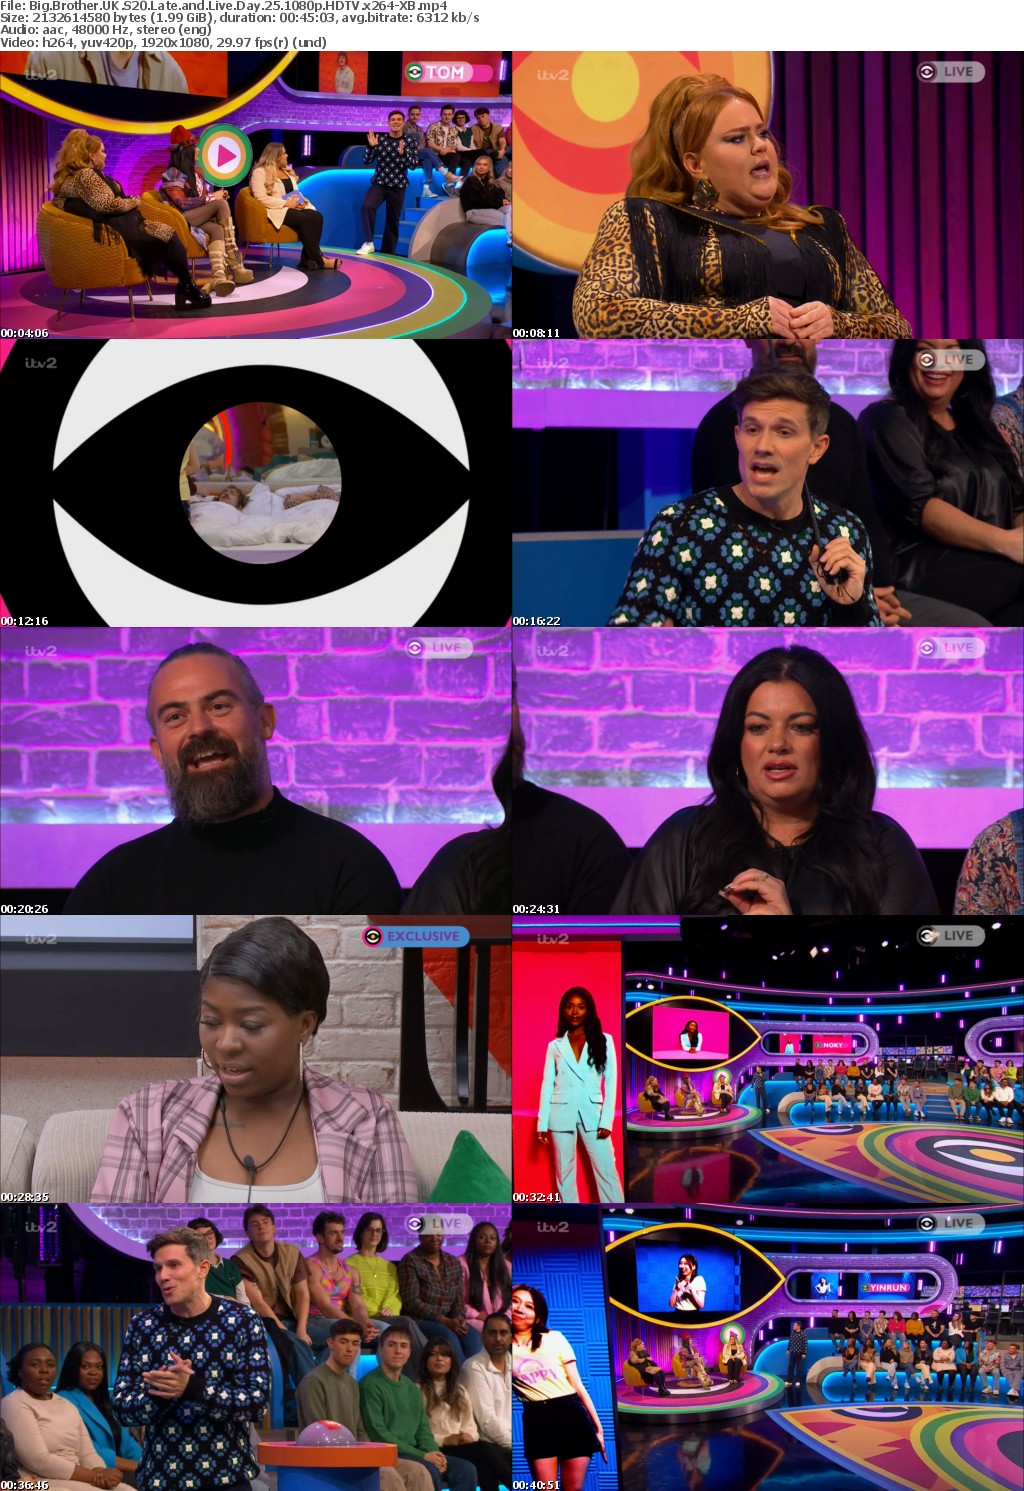 Big Brother UK S20 Late and Live Day 25 1080p HDTV x264-XB